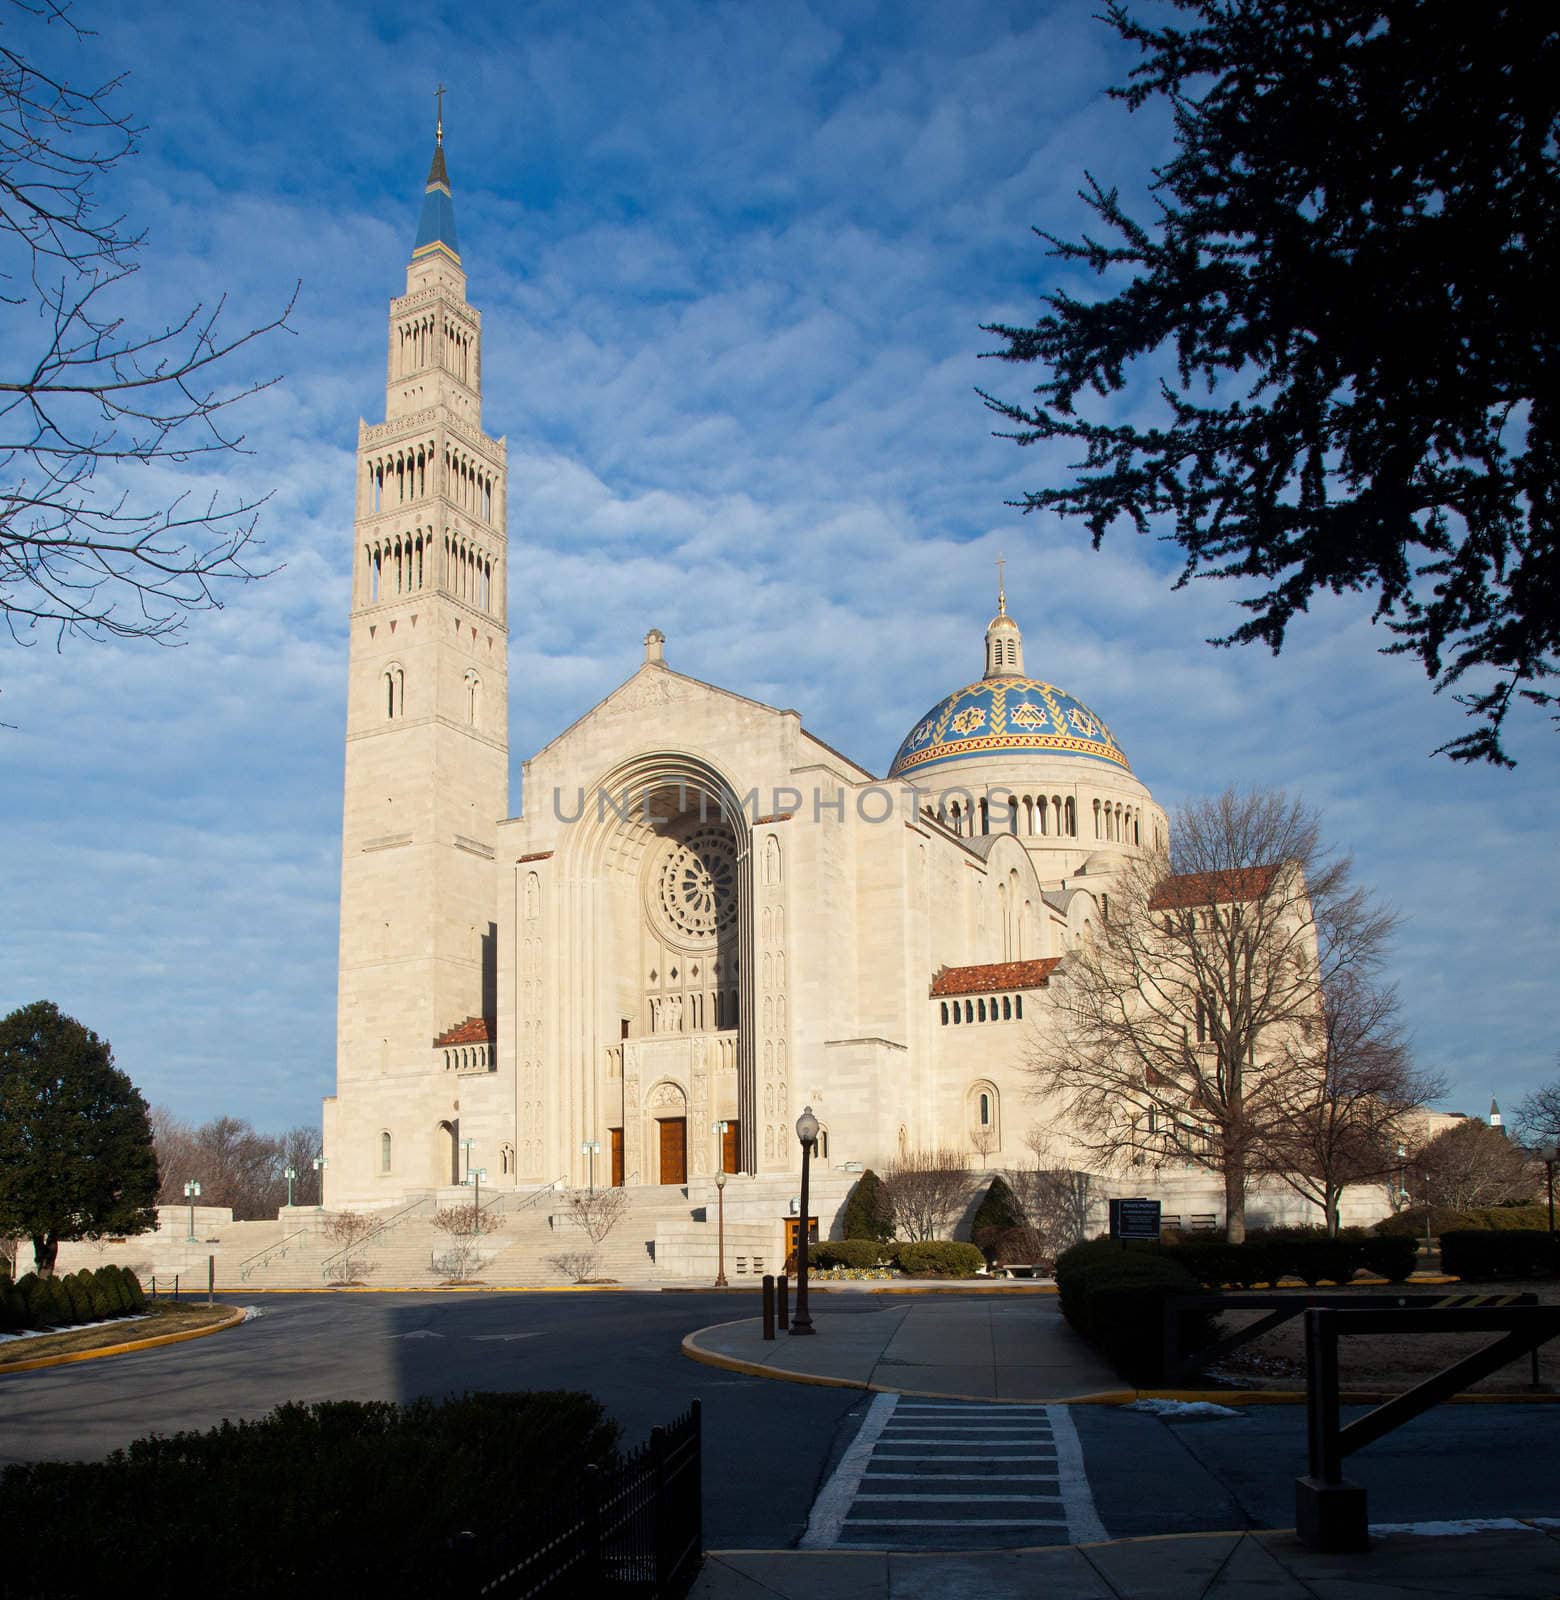 Basilica of the National Shrine of the Immaculate Conception by steheap